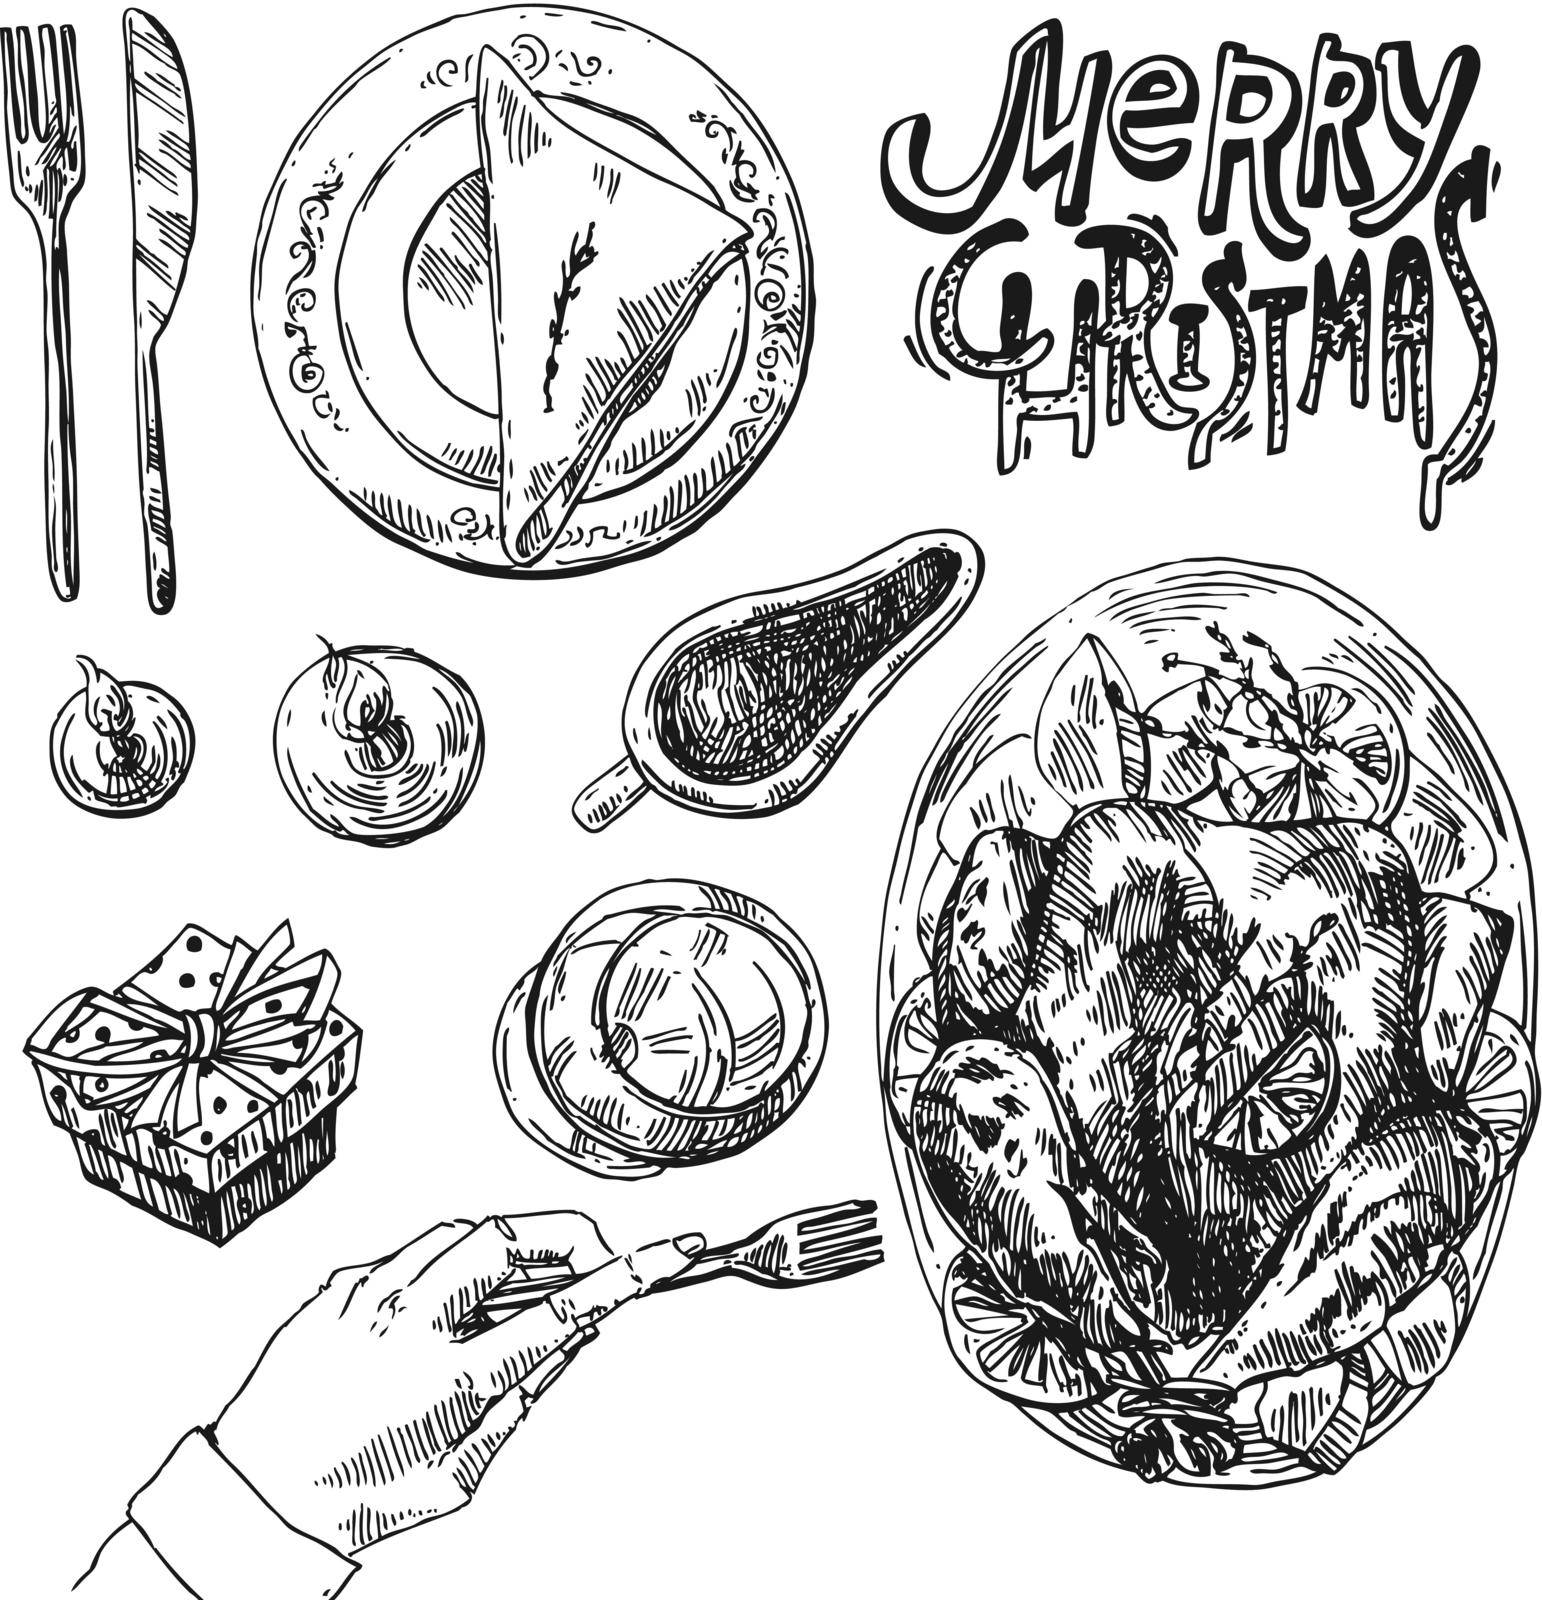 Hand drawn sketch illustration christmas food. Sketch style drawing. Us for Invitations, flyers, postcards, web etc